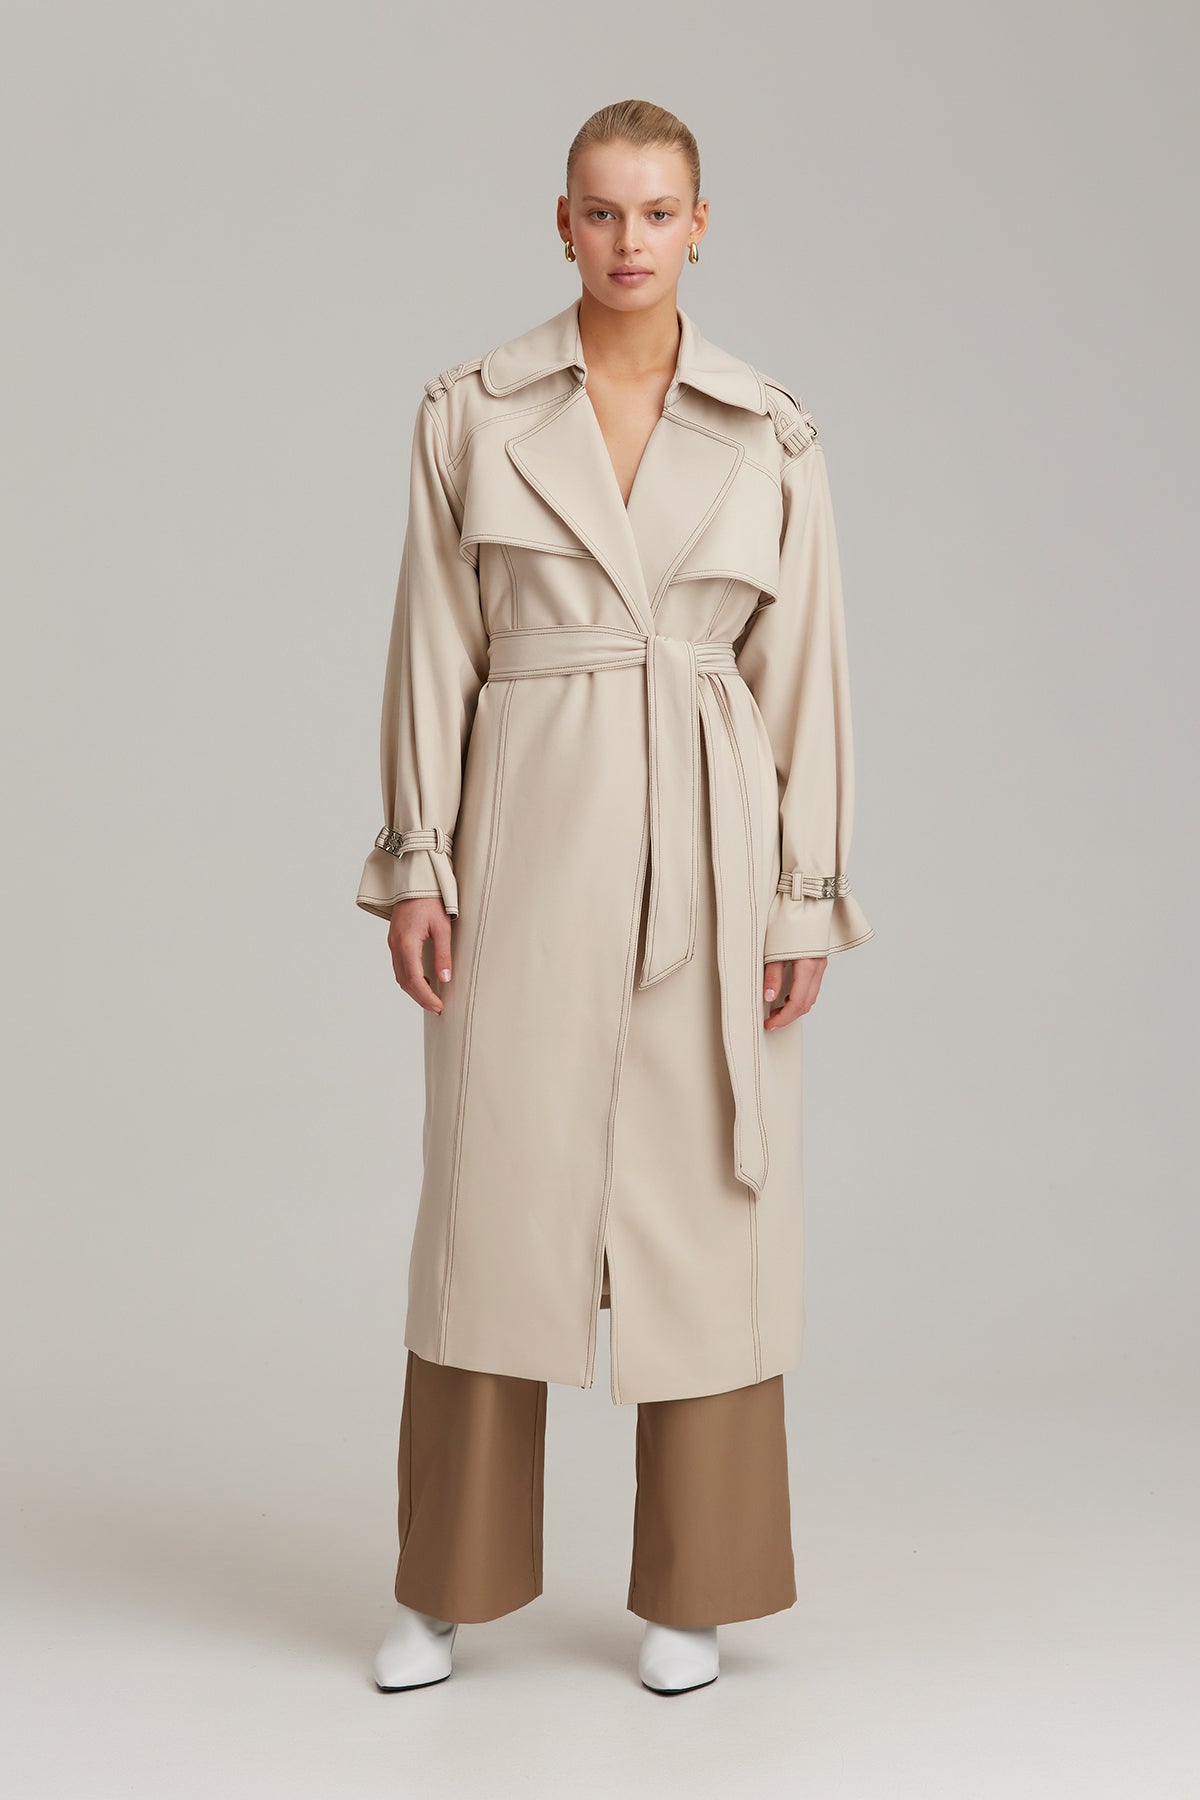 C/MEO Collective - Definition Trench - Oat